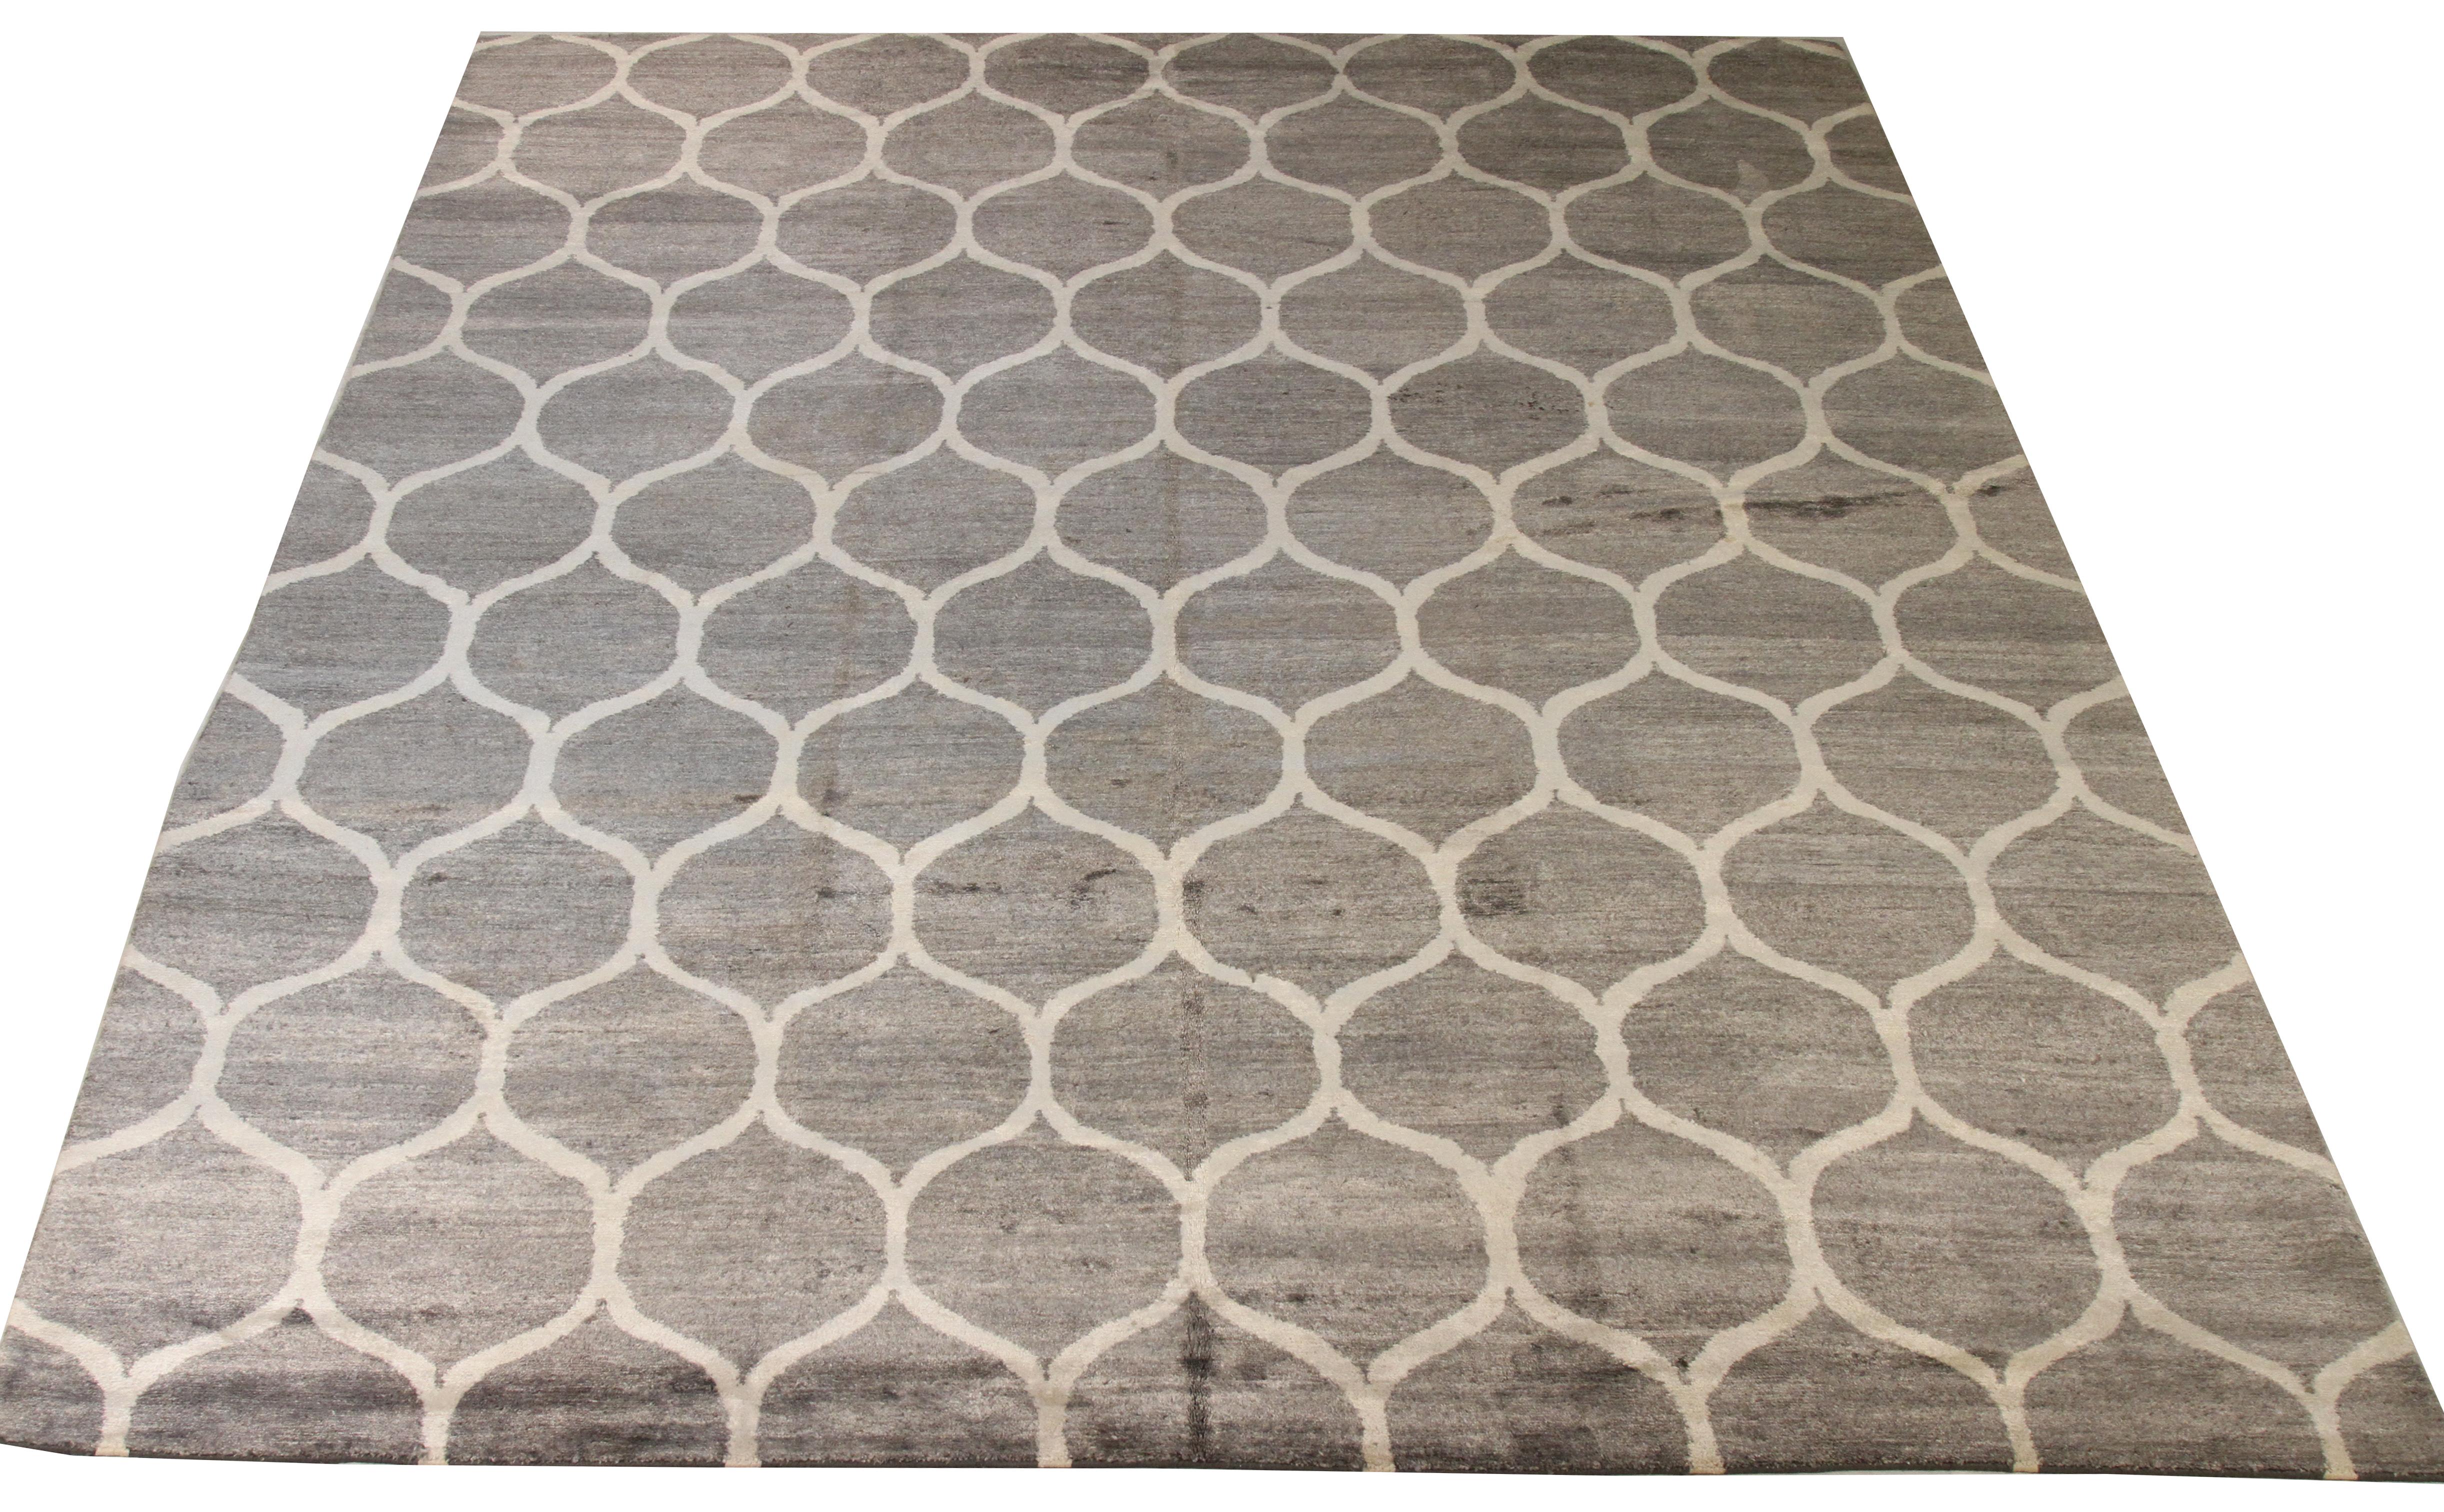 Contemporary Nepalese rug hand-knotted from a mix of fine wool, silk and colored with all-natural vegetable dyes that are safe for people and pets. It features a modern honeycomb pattern infused with abstract elements. 

This area rug has a